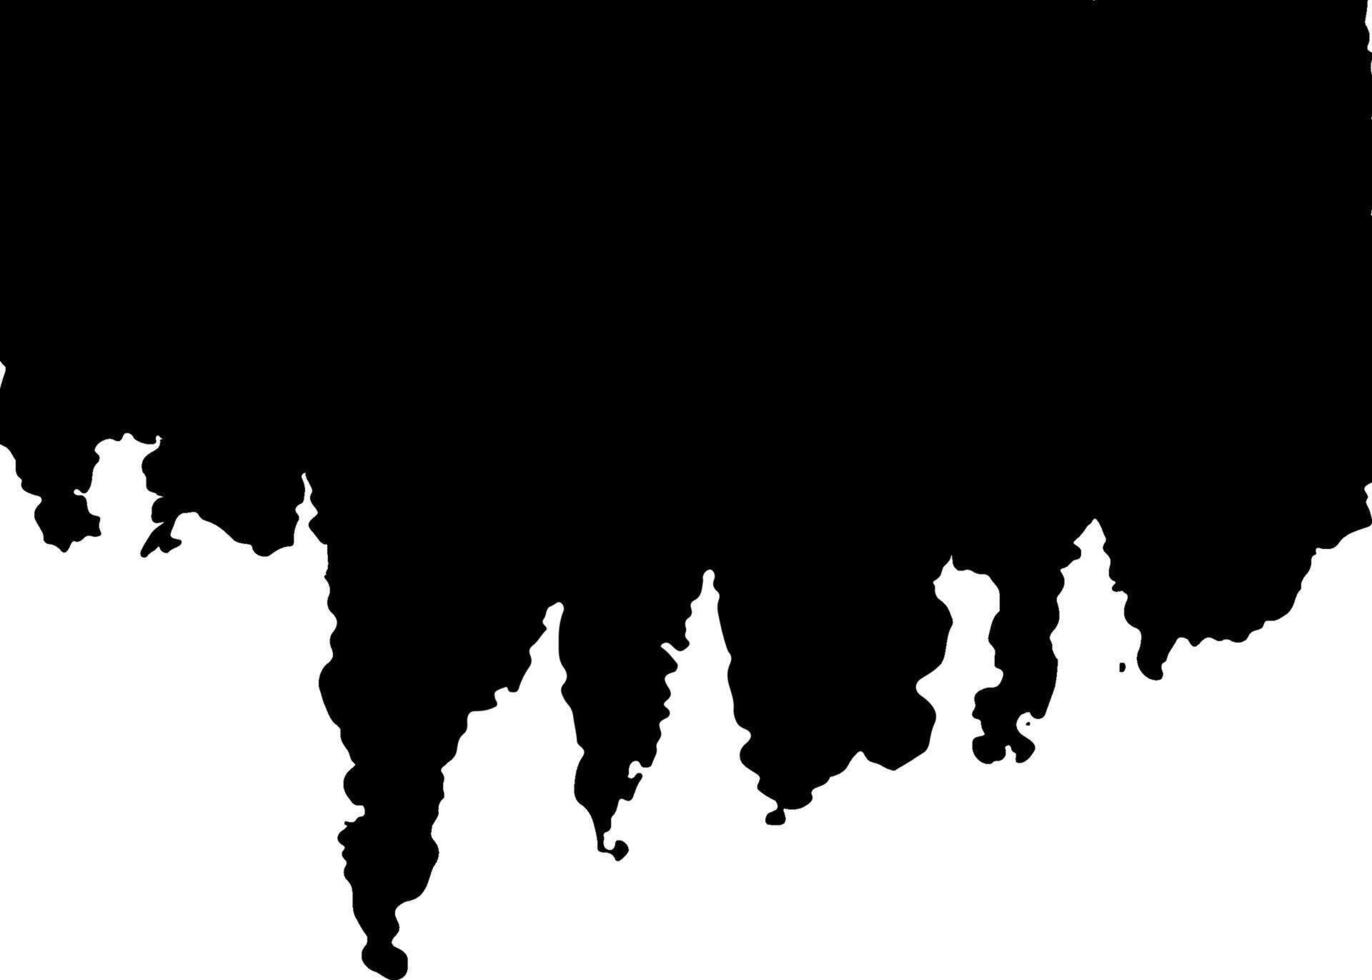 black ink dripping on white background vector